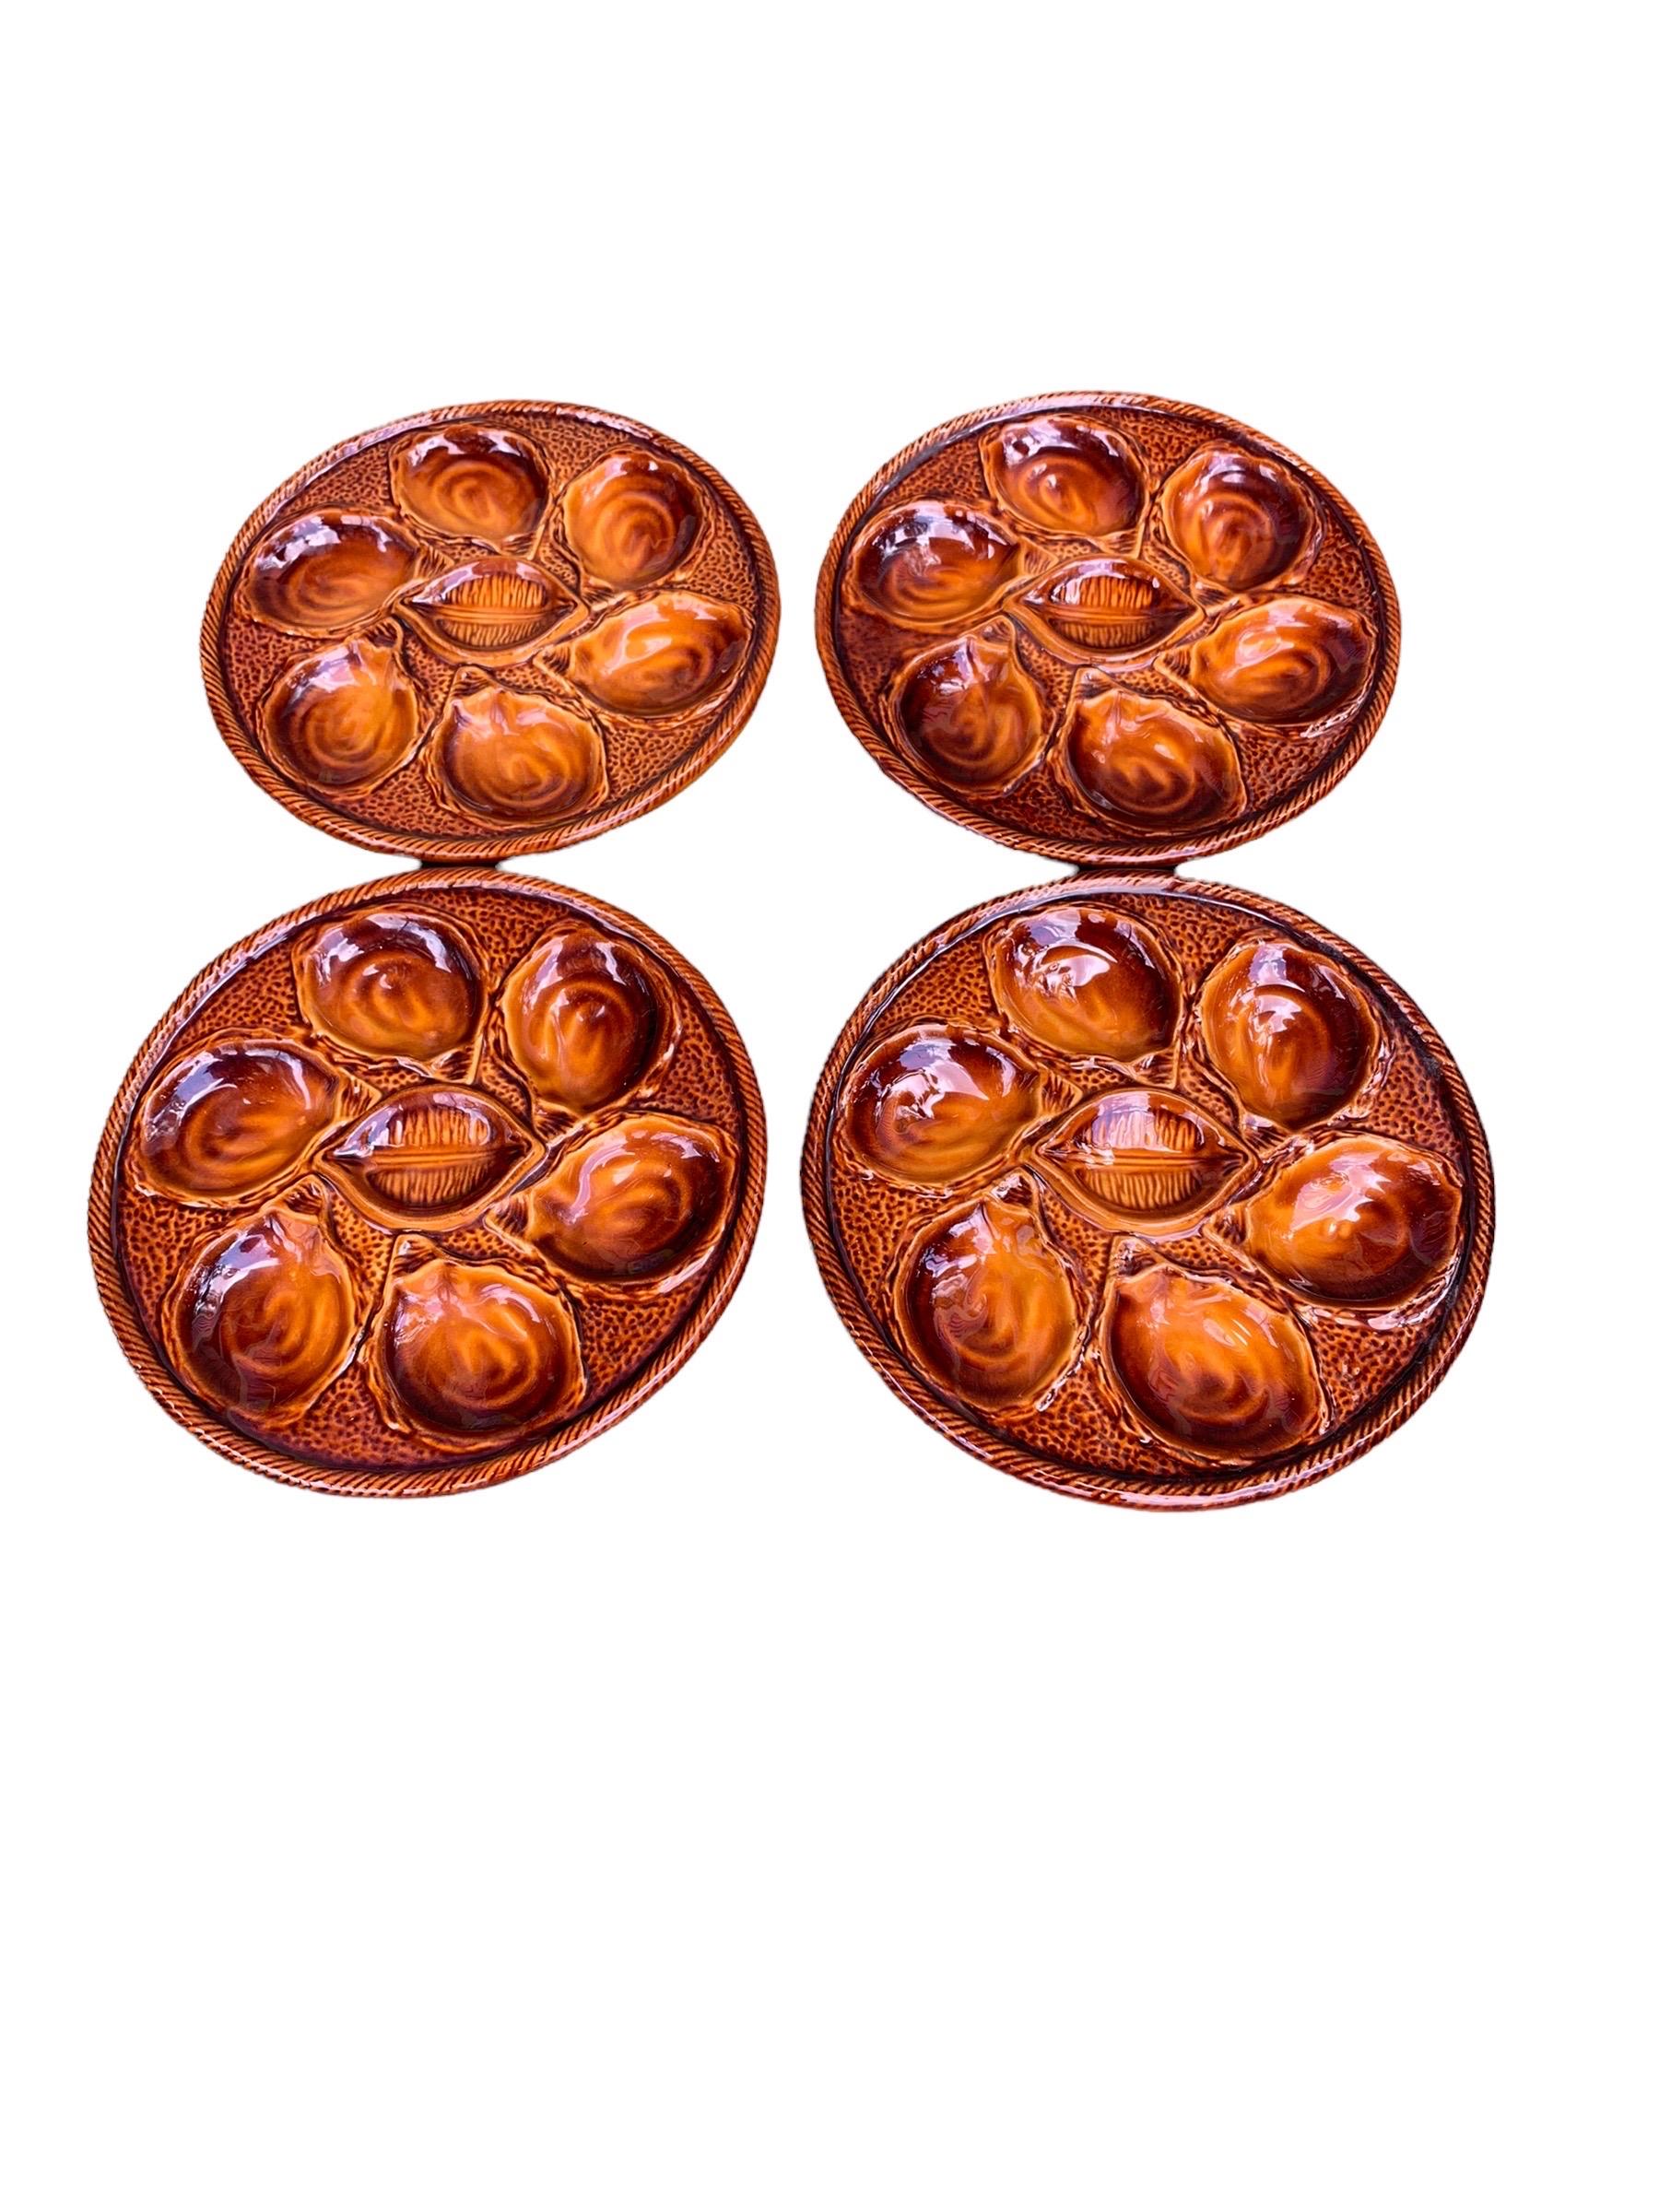 A set of four vintage 1950’s French St Clements oyster plates in the treacle glaze. These plates were produced in the 1950's in the famous St Clement factory in France. They are glazed in a beautiful, rich treacle majolica, each plate holds six